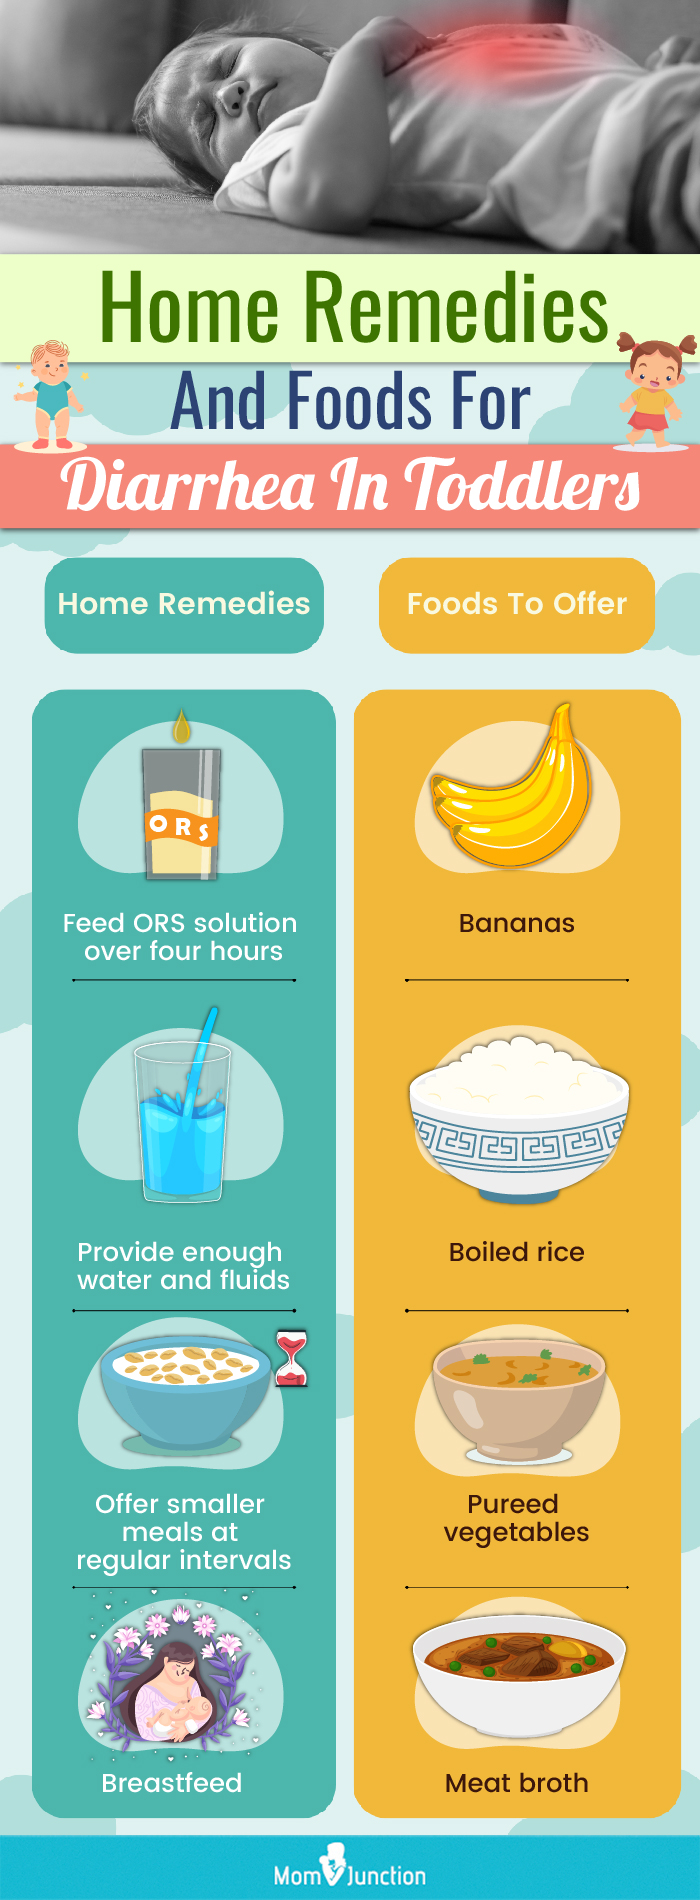 home remedies and foods for diarrhea in toddlers (infographic)